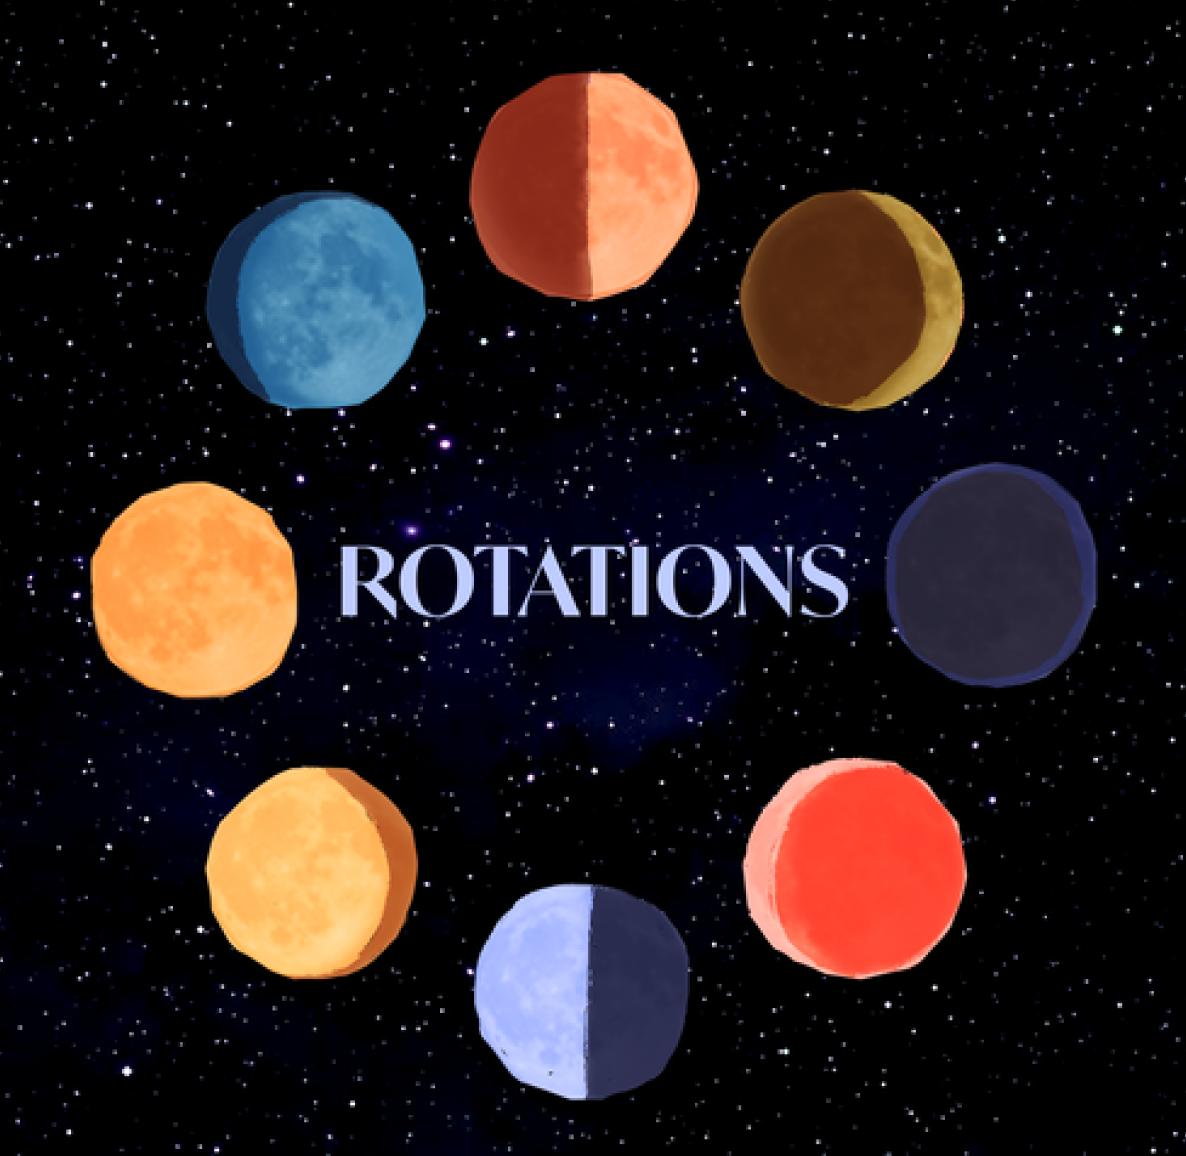 ROTATIONS is a collaborative movement practice working towards deepening and challenging our understanding of artistry, disability, and access.